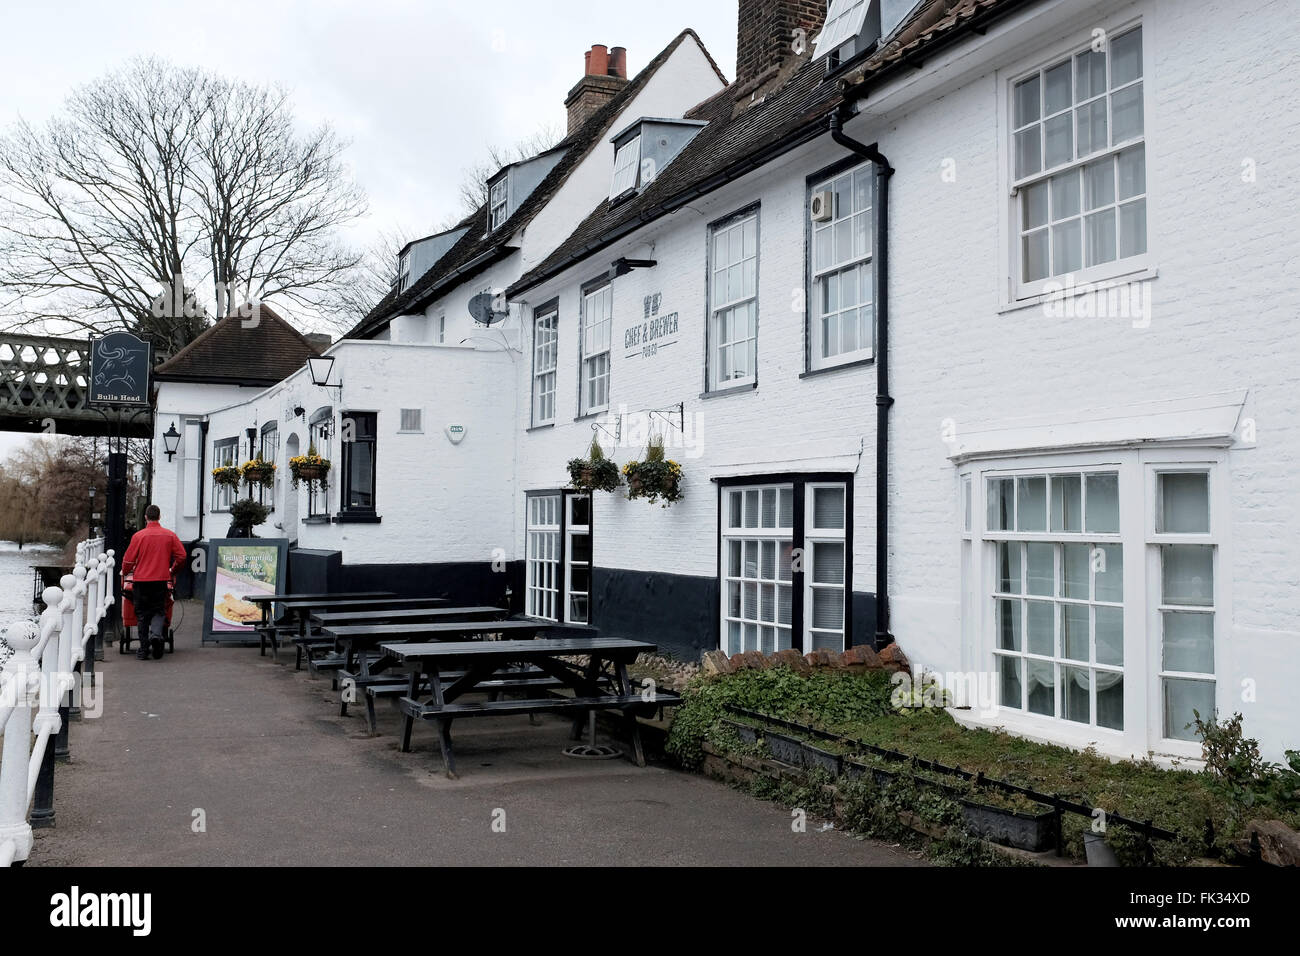 The Bull's Head pub overlooking River Thames at Strand on the Green Chiswick in the Hounslow district of West London UK Stock Photo